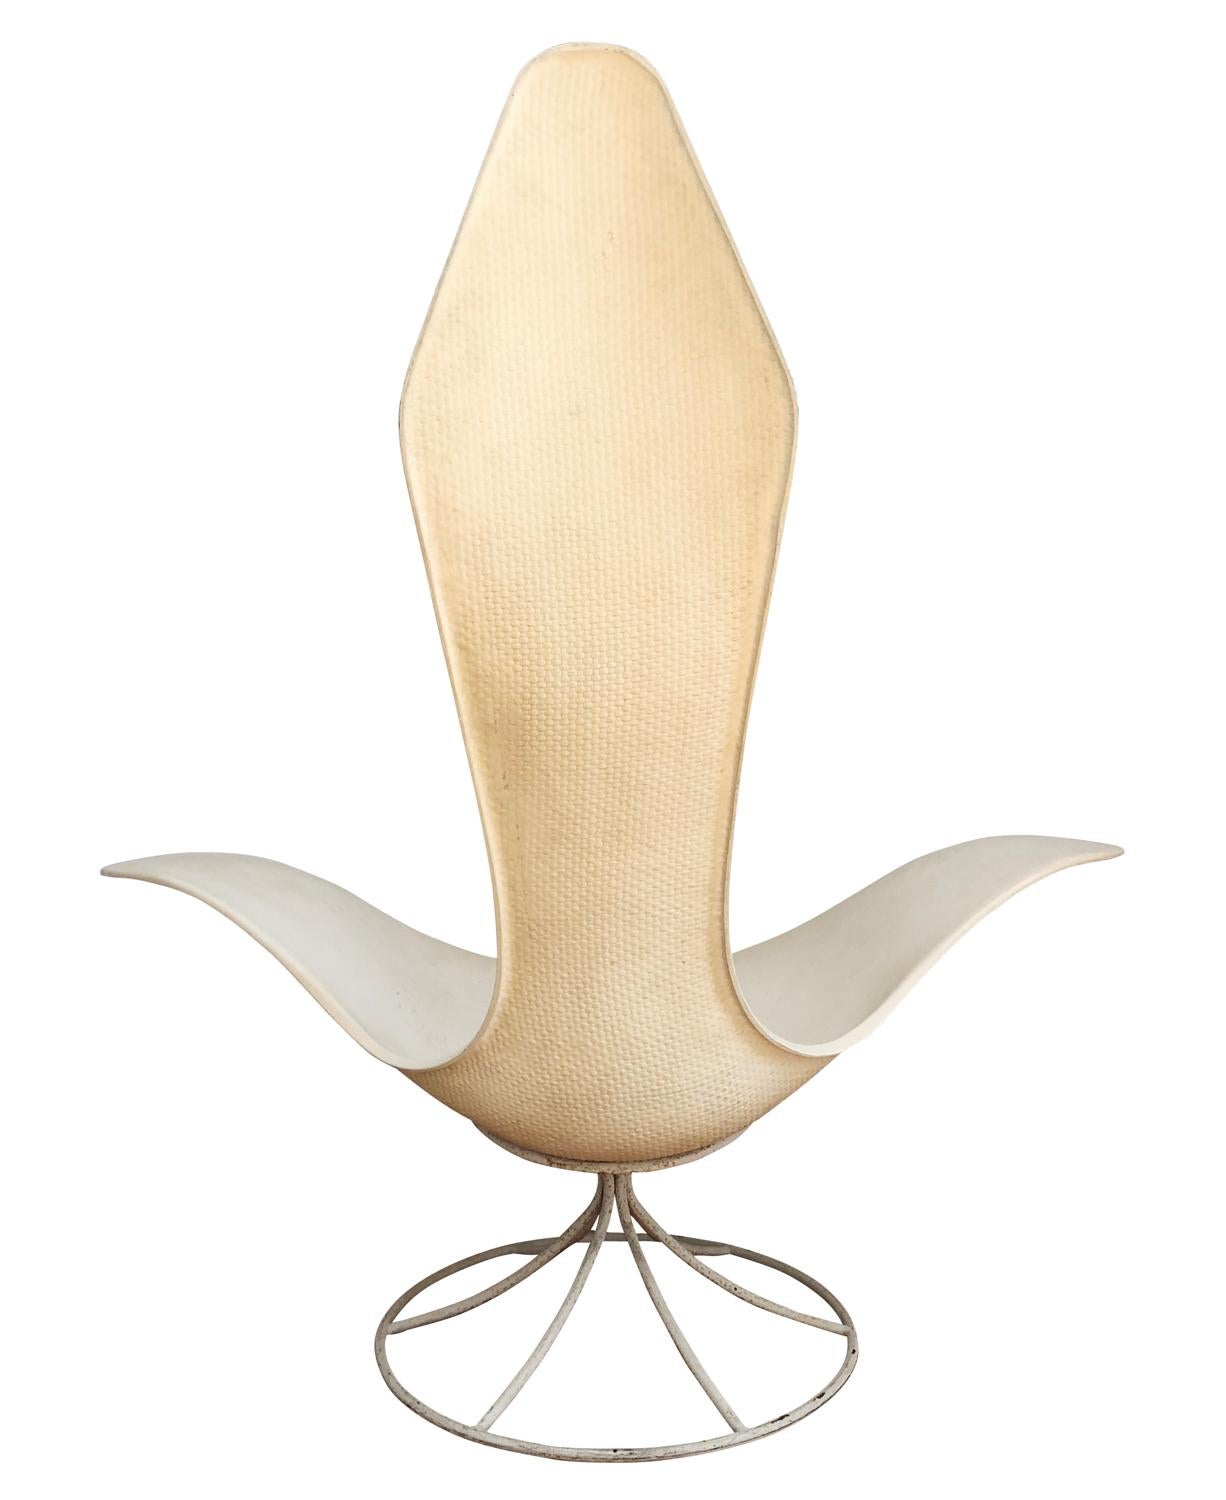 American Mid-Century Modern White Sculptural Tulip Lounge by Estelle and Erwine Laverne